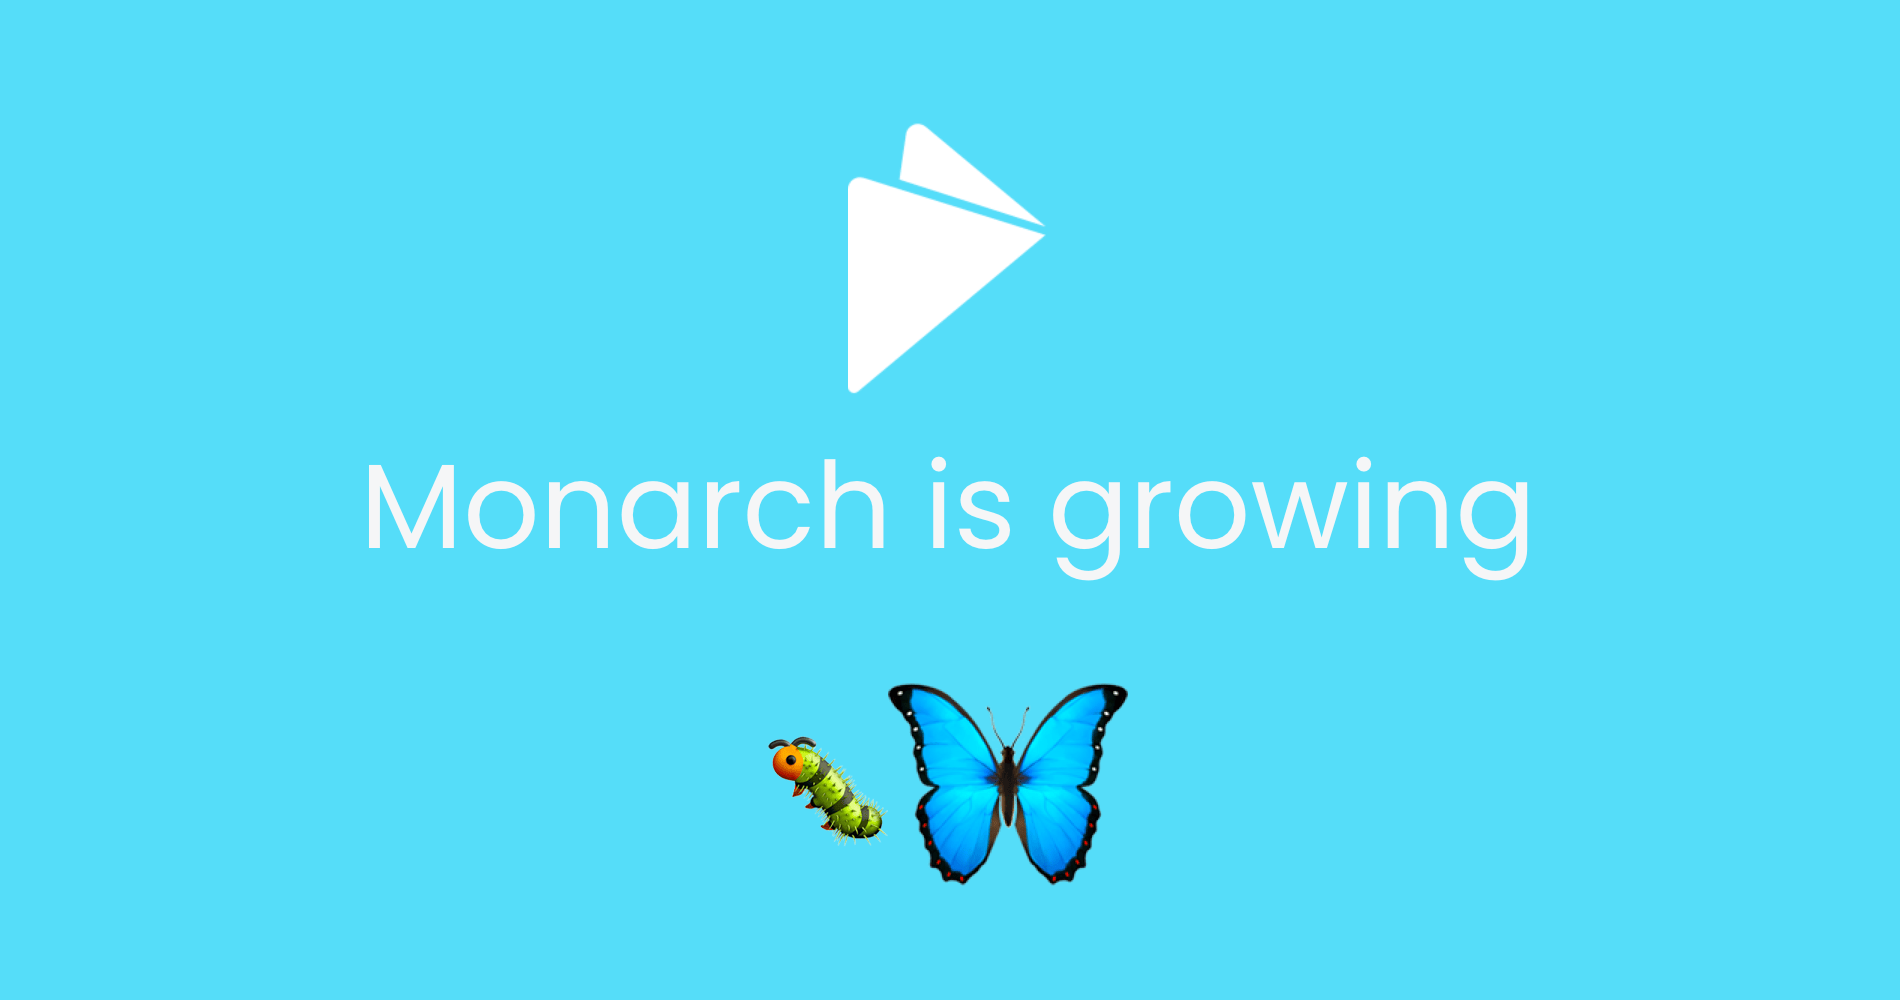 Monarch is growing